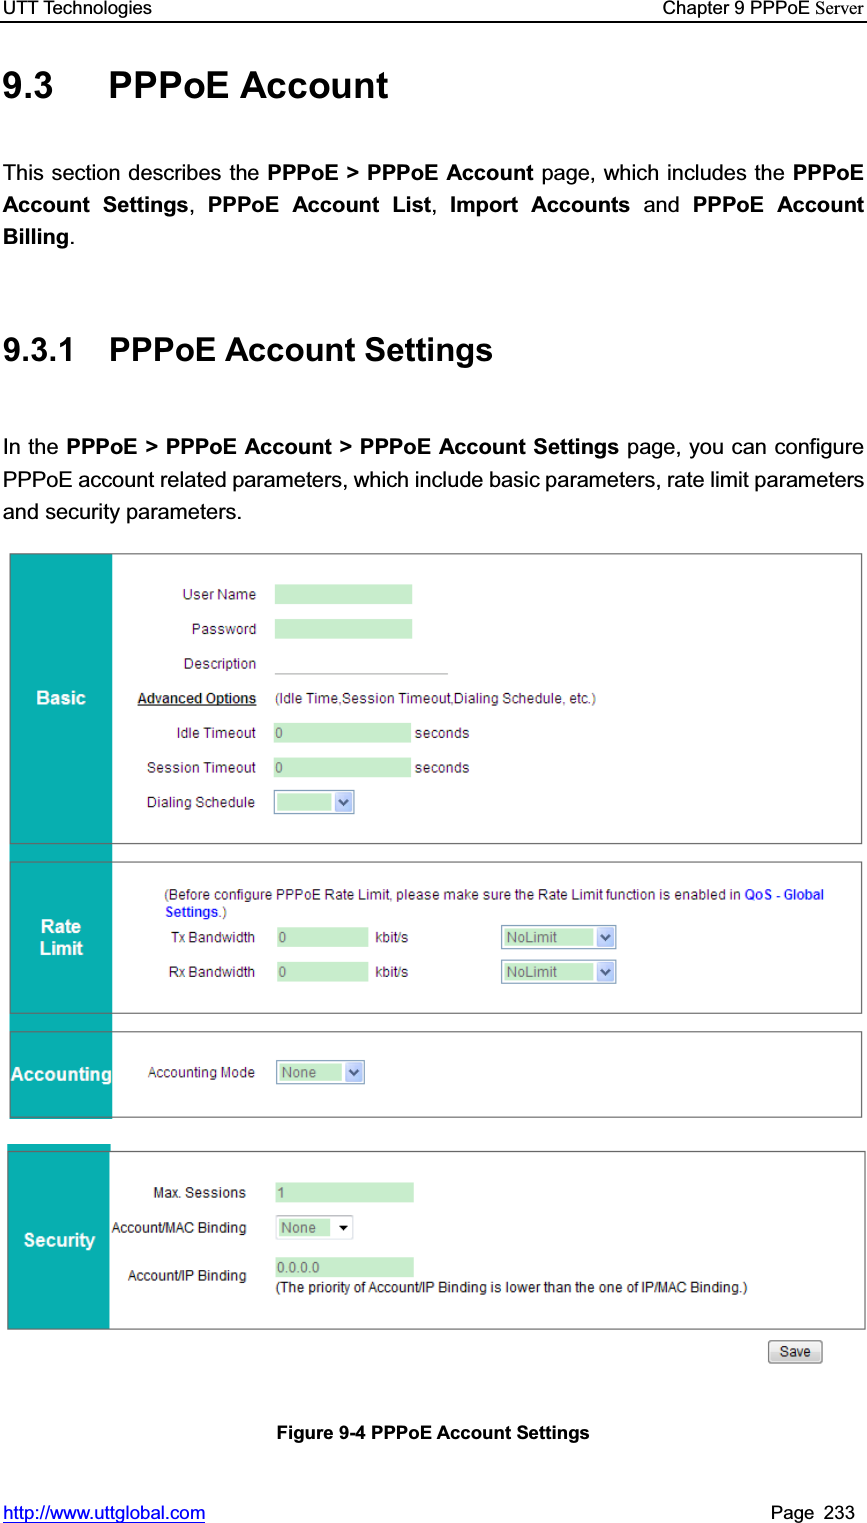 UTT Technologies    Chapter 9 PPPoE Serverhttp://www.uttglobal.com Page 233 9.3 PPPoE Account  This section describes the PPPoE &gt; PPPoE Account page, which includes the PPPoE Account Settings,PPPoE Account List,Import Accounts and PPPoE Account Billing.9.3.1 PPPoE Account Settings In the PPPoE &gt; PPPoE Account &gt; PPPoE Account Settings page, you can configure PPPoE account related parameters, which include basic parameters, rate limit parameters and security parameters.   Figure 9-4 PPPoE Account Settings 